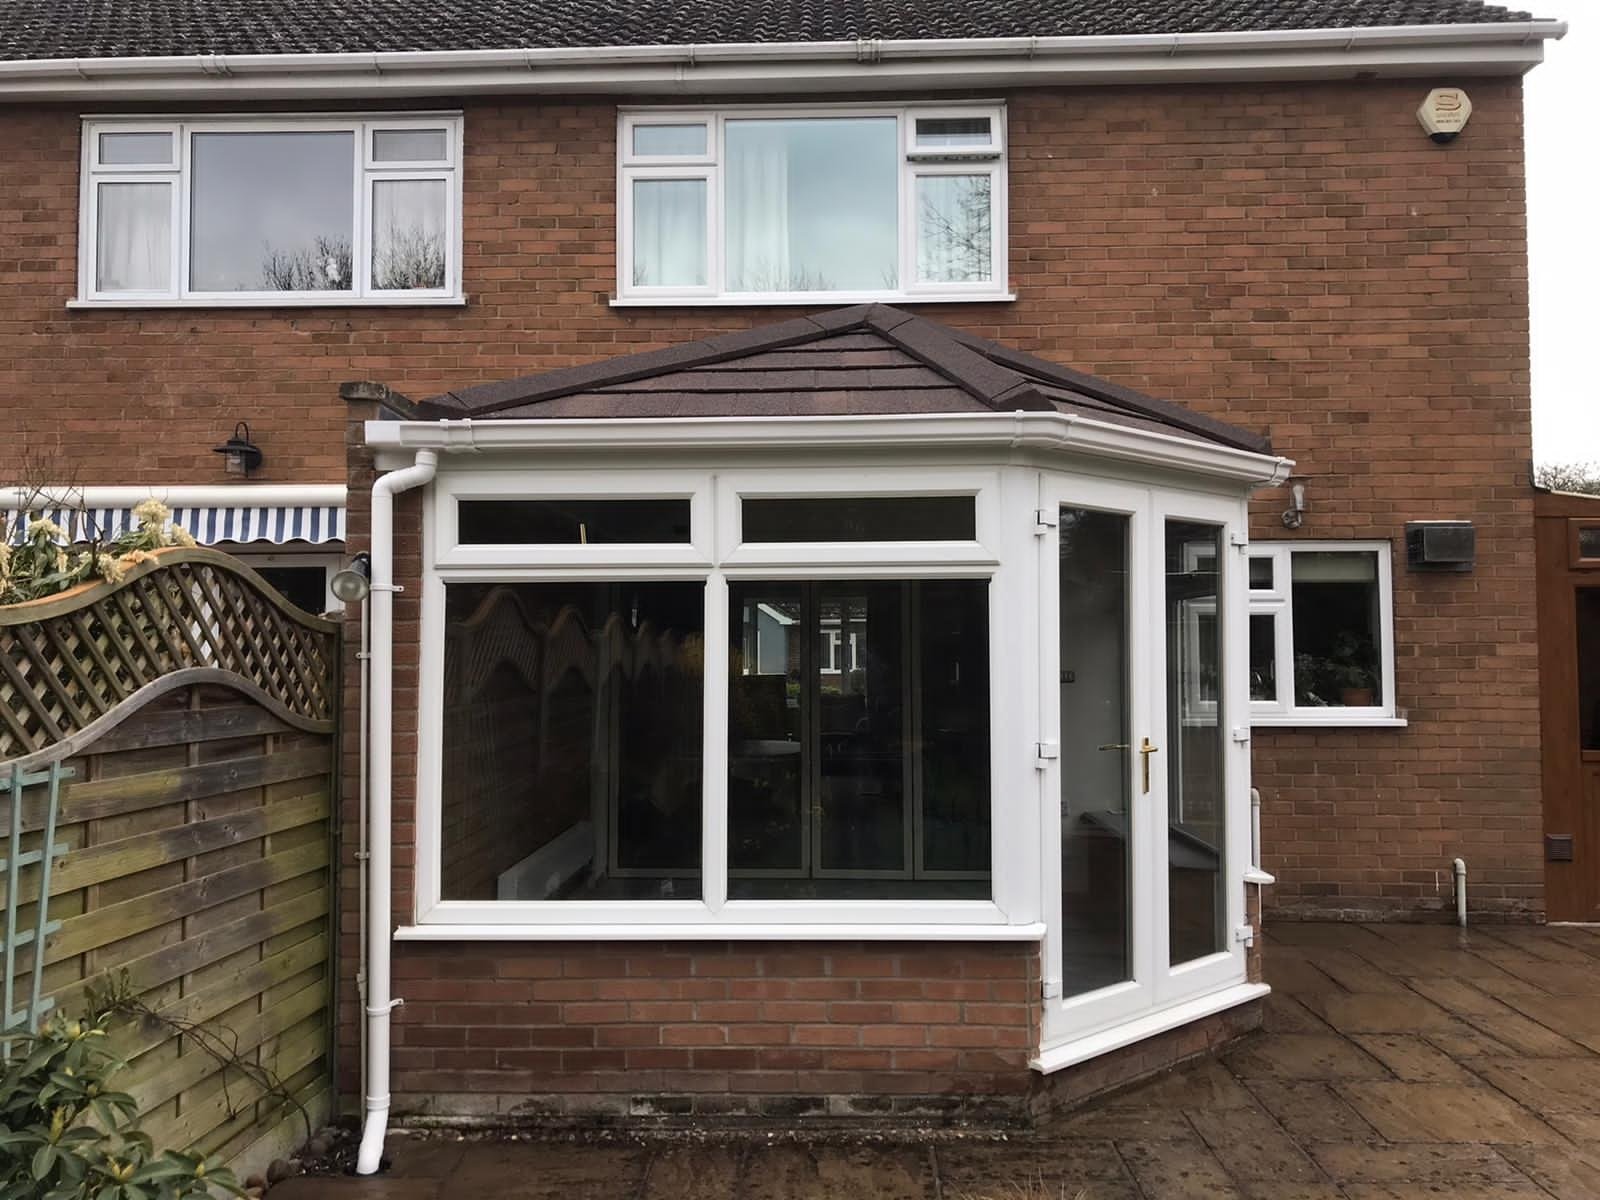 Conservatory in Cambridge after a Tiled Conservatory Roof Transformation